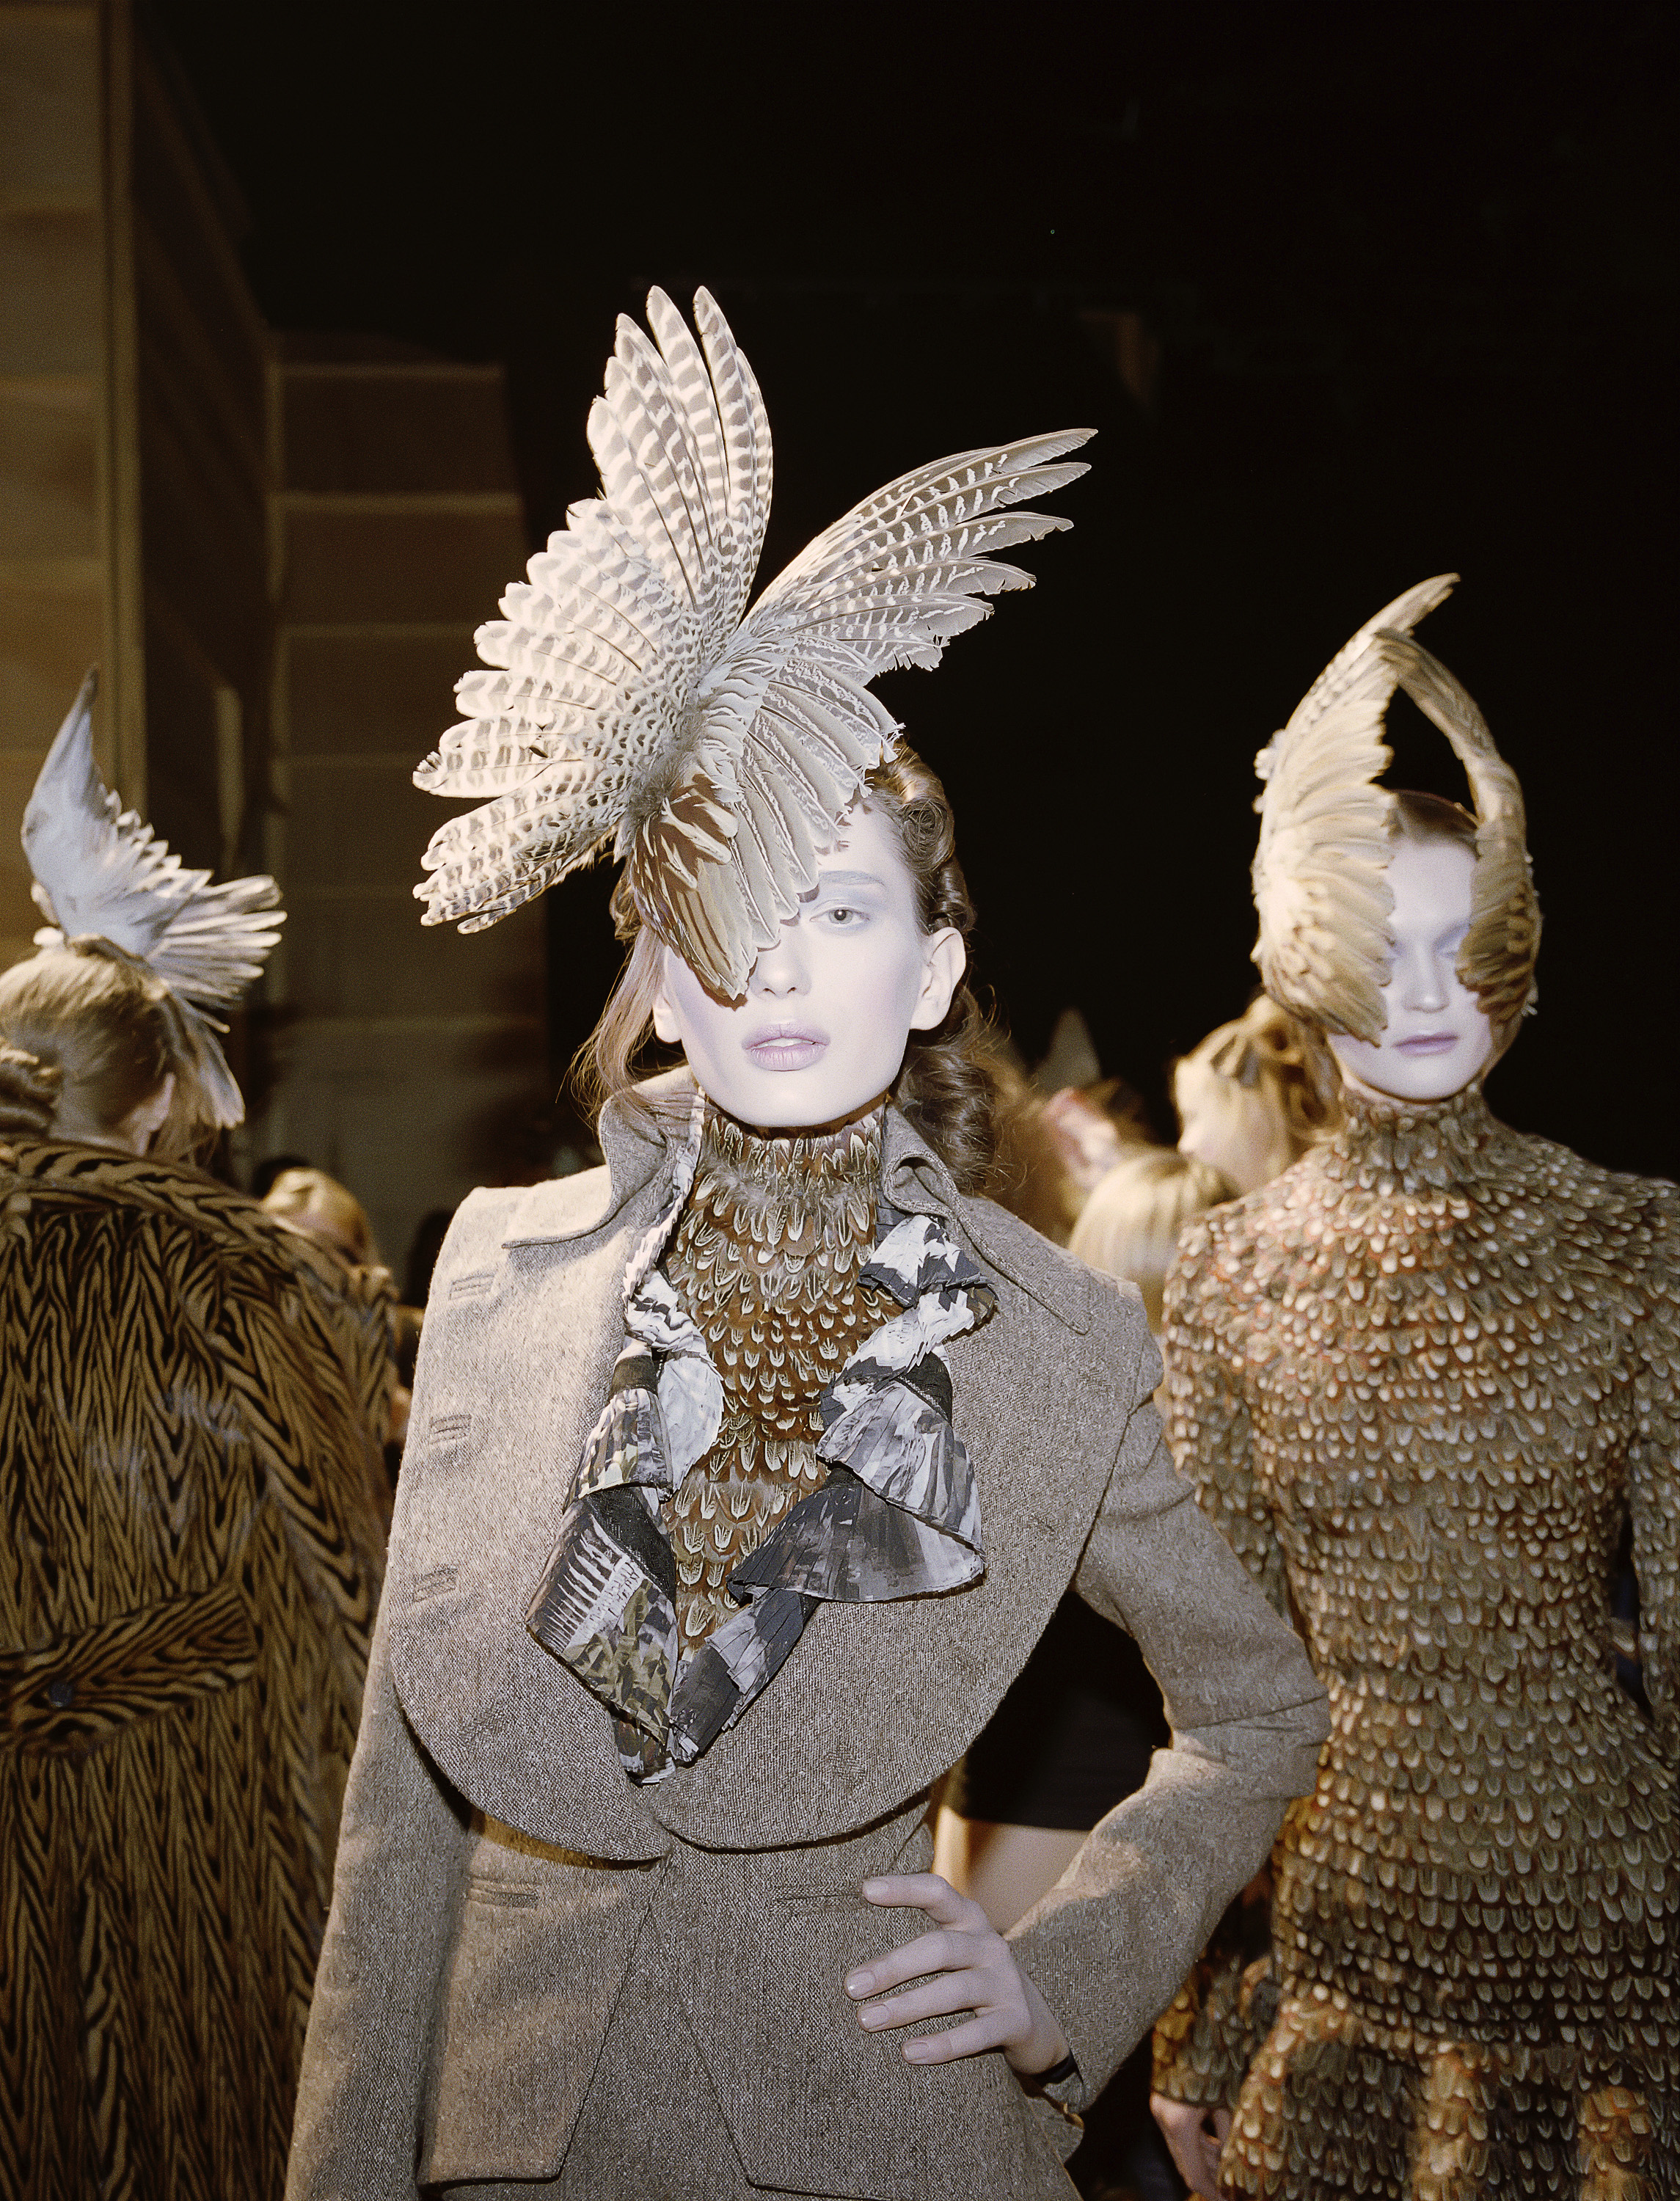 The model poses with her hand on her hip, wears a feather cover and a unique jacket, and her face is powdered in white